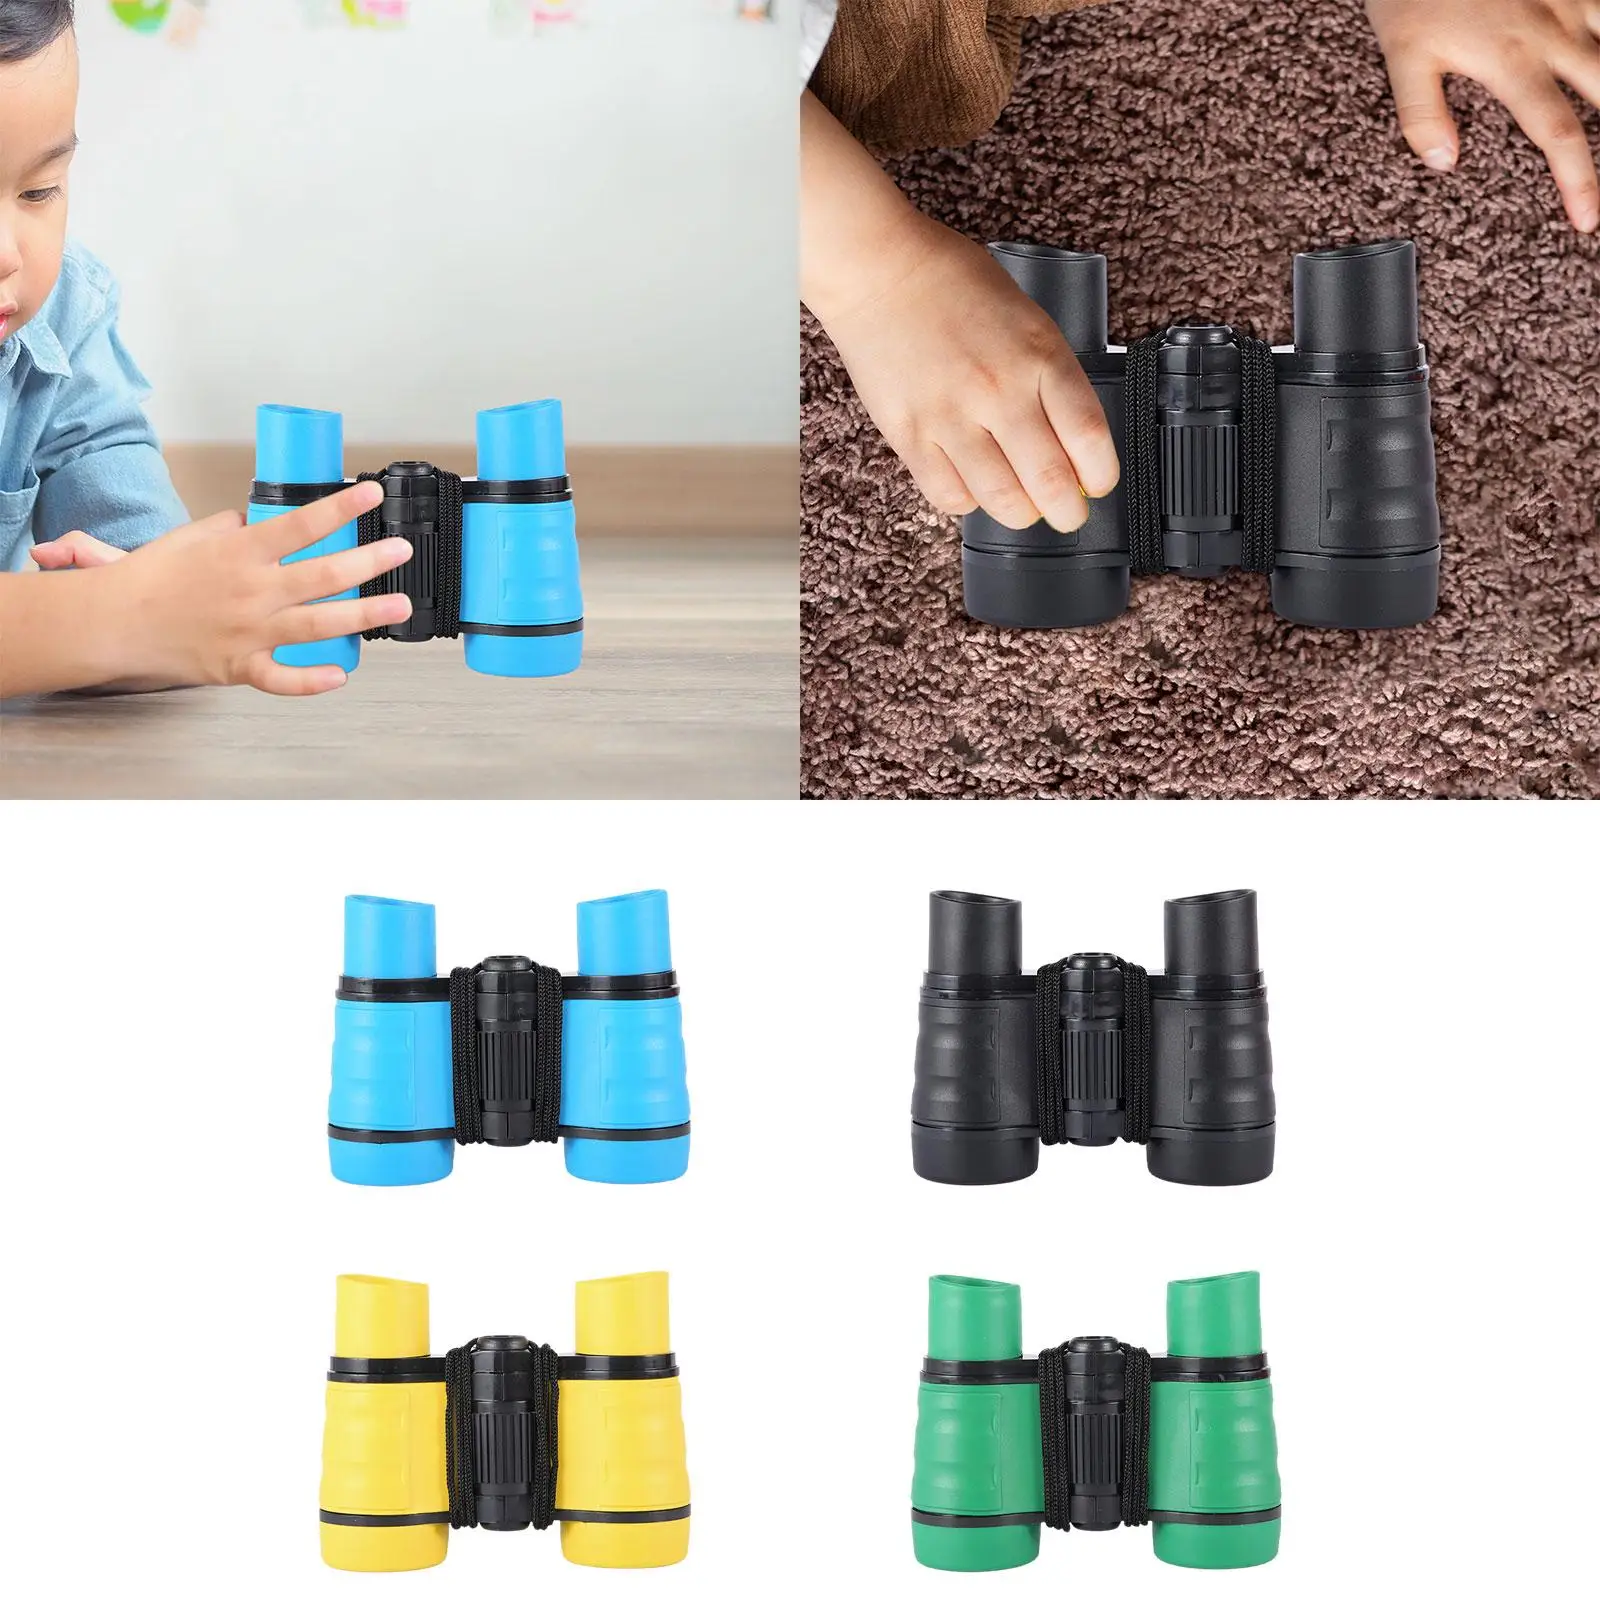 Kids Binoculars 4x30 Shockproof Bird Watching Telescope Portable for Detective Hunting Party Favors Outdoor Activity Hiking